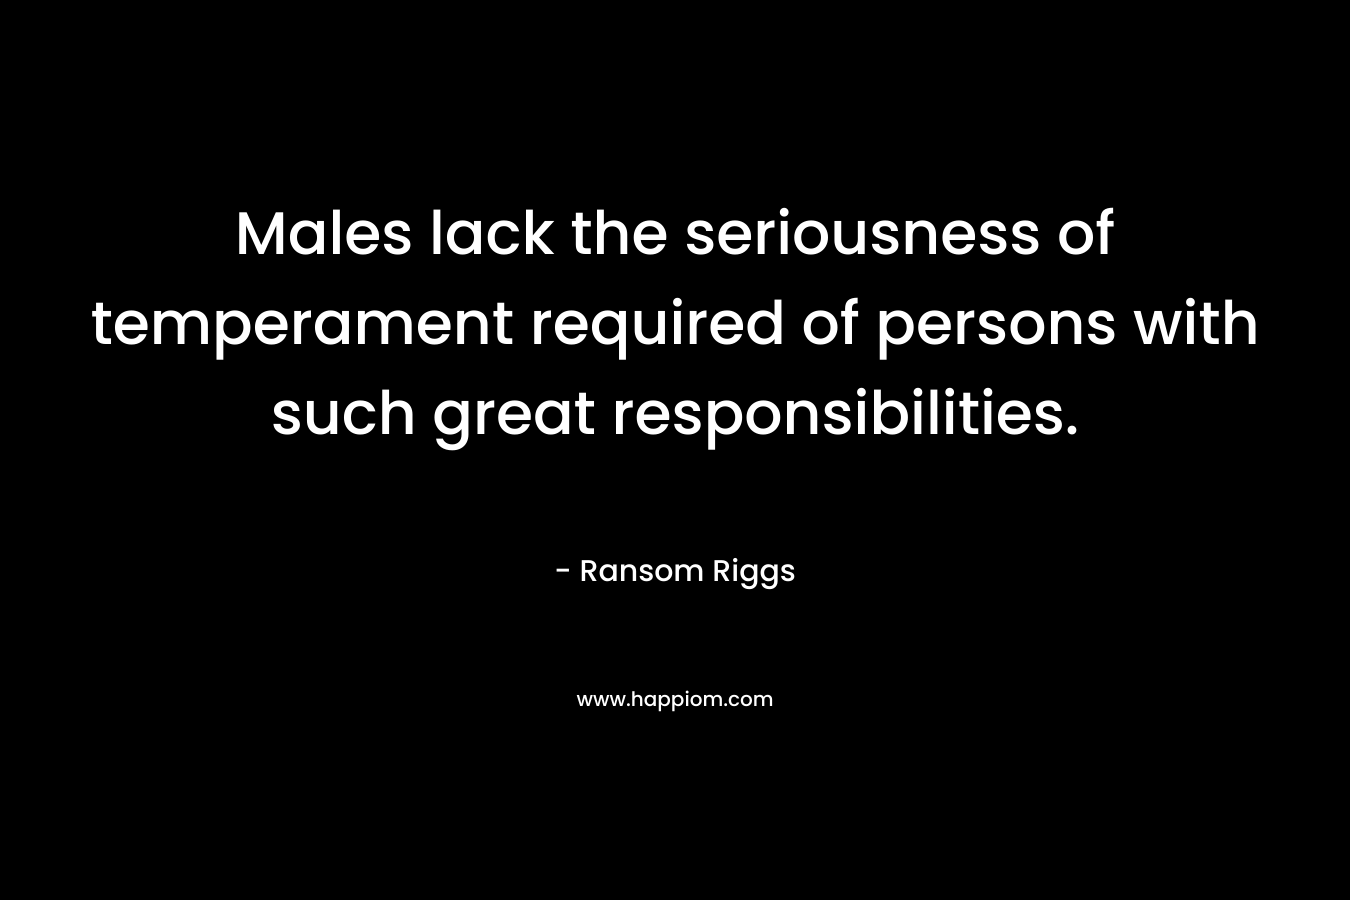 Males lack the seriousness of temperament required of persons with such great responsibilities.